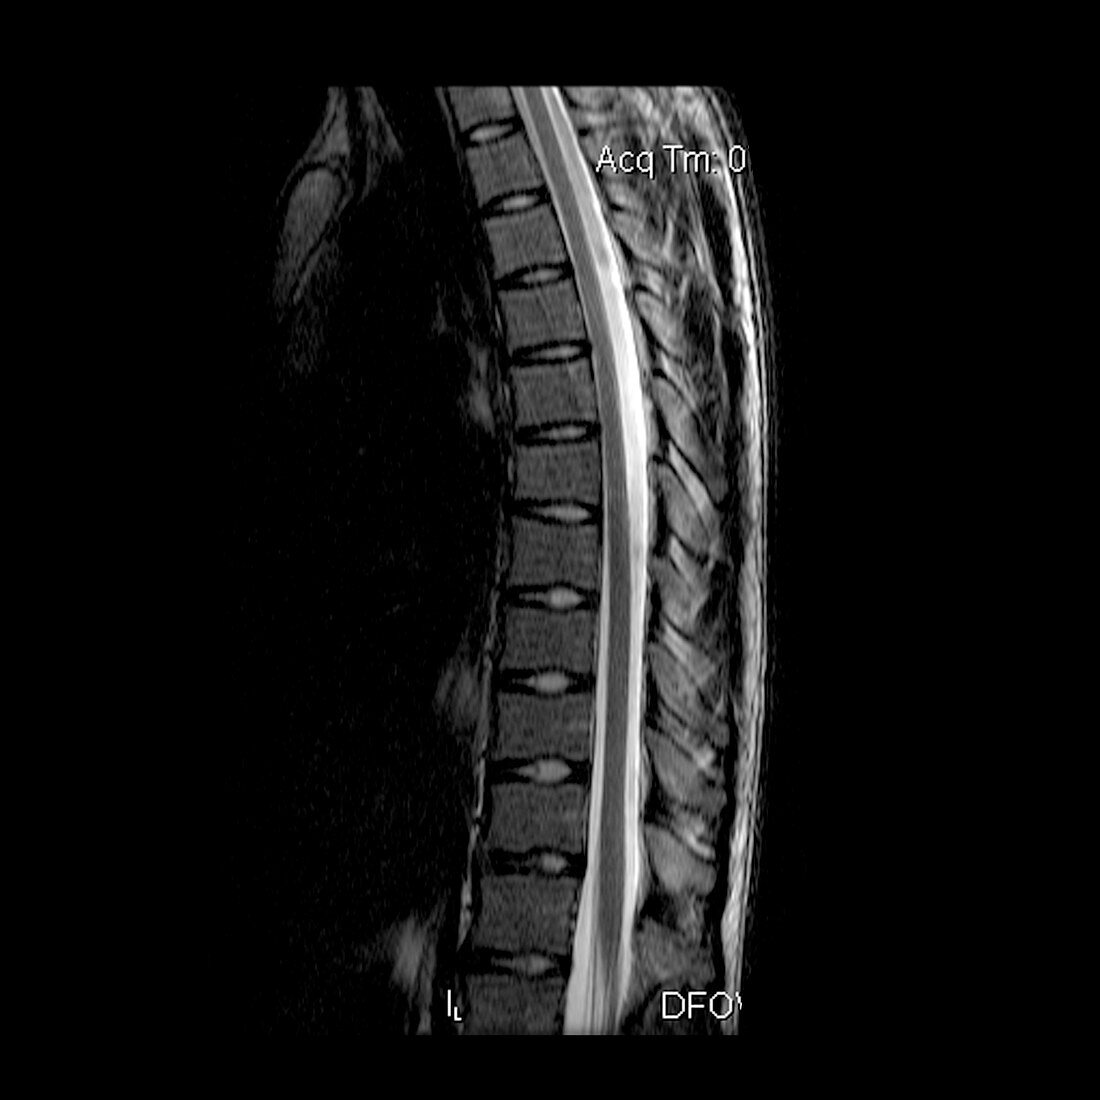 Normal Spine and Spina